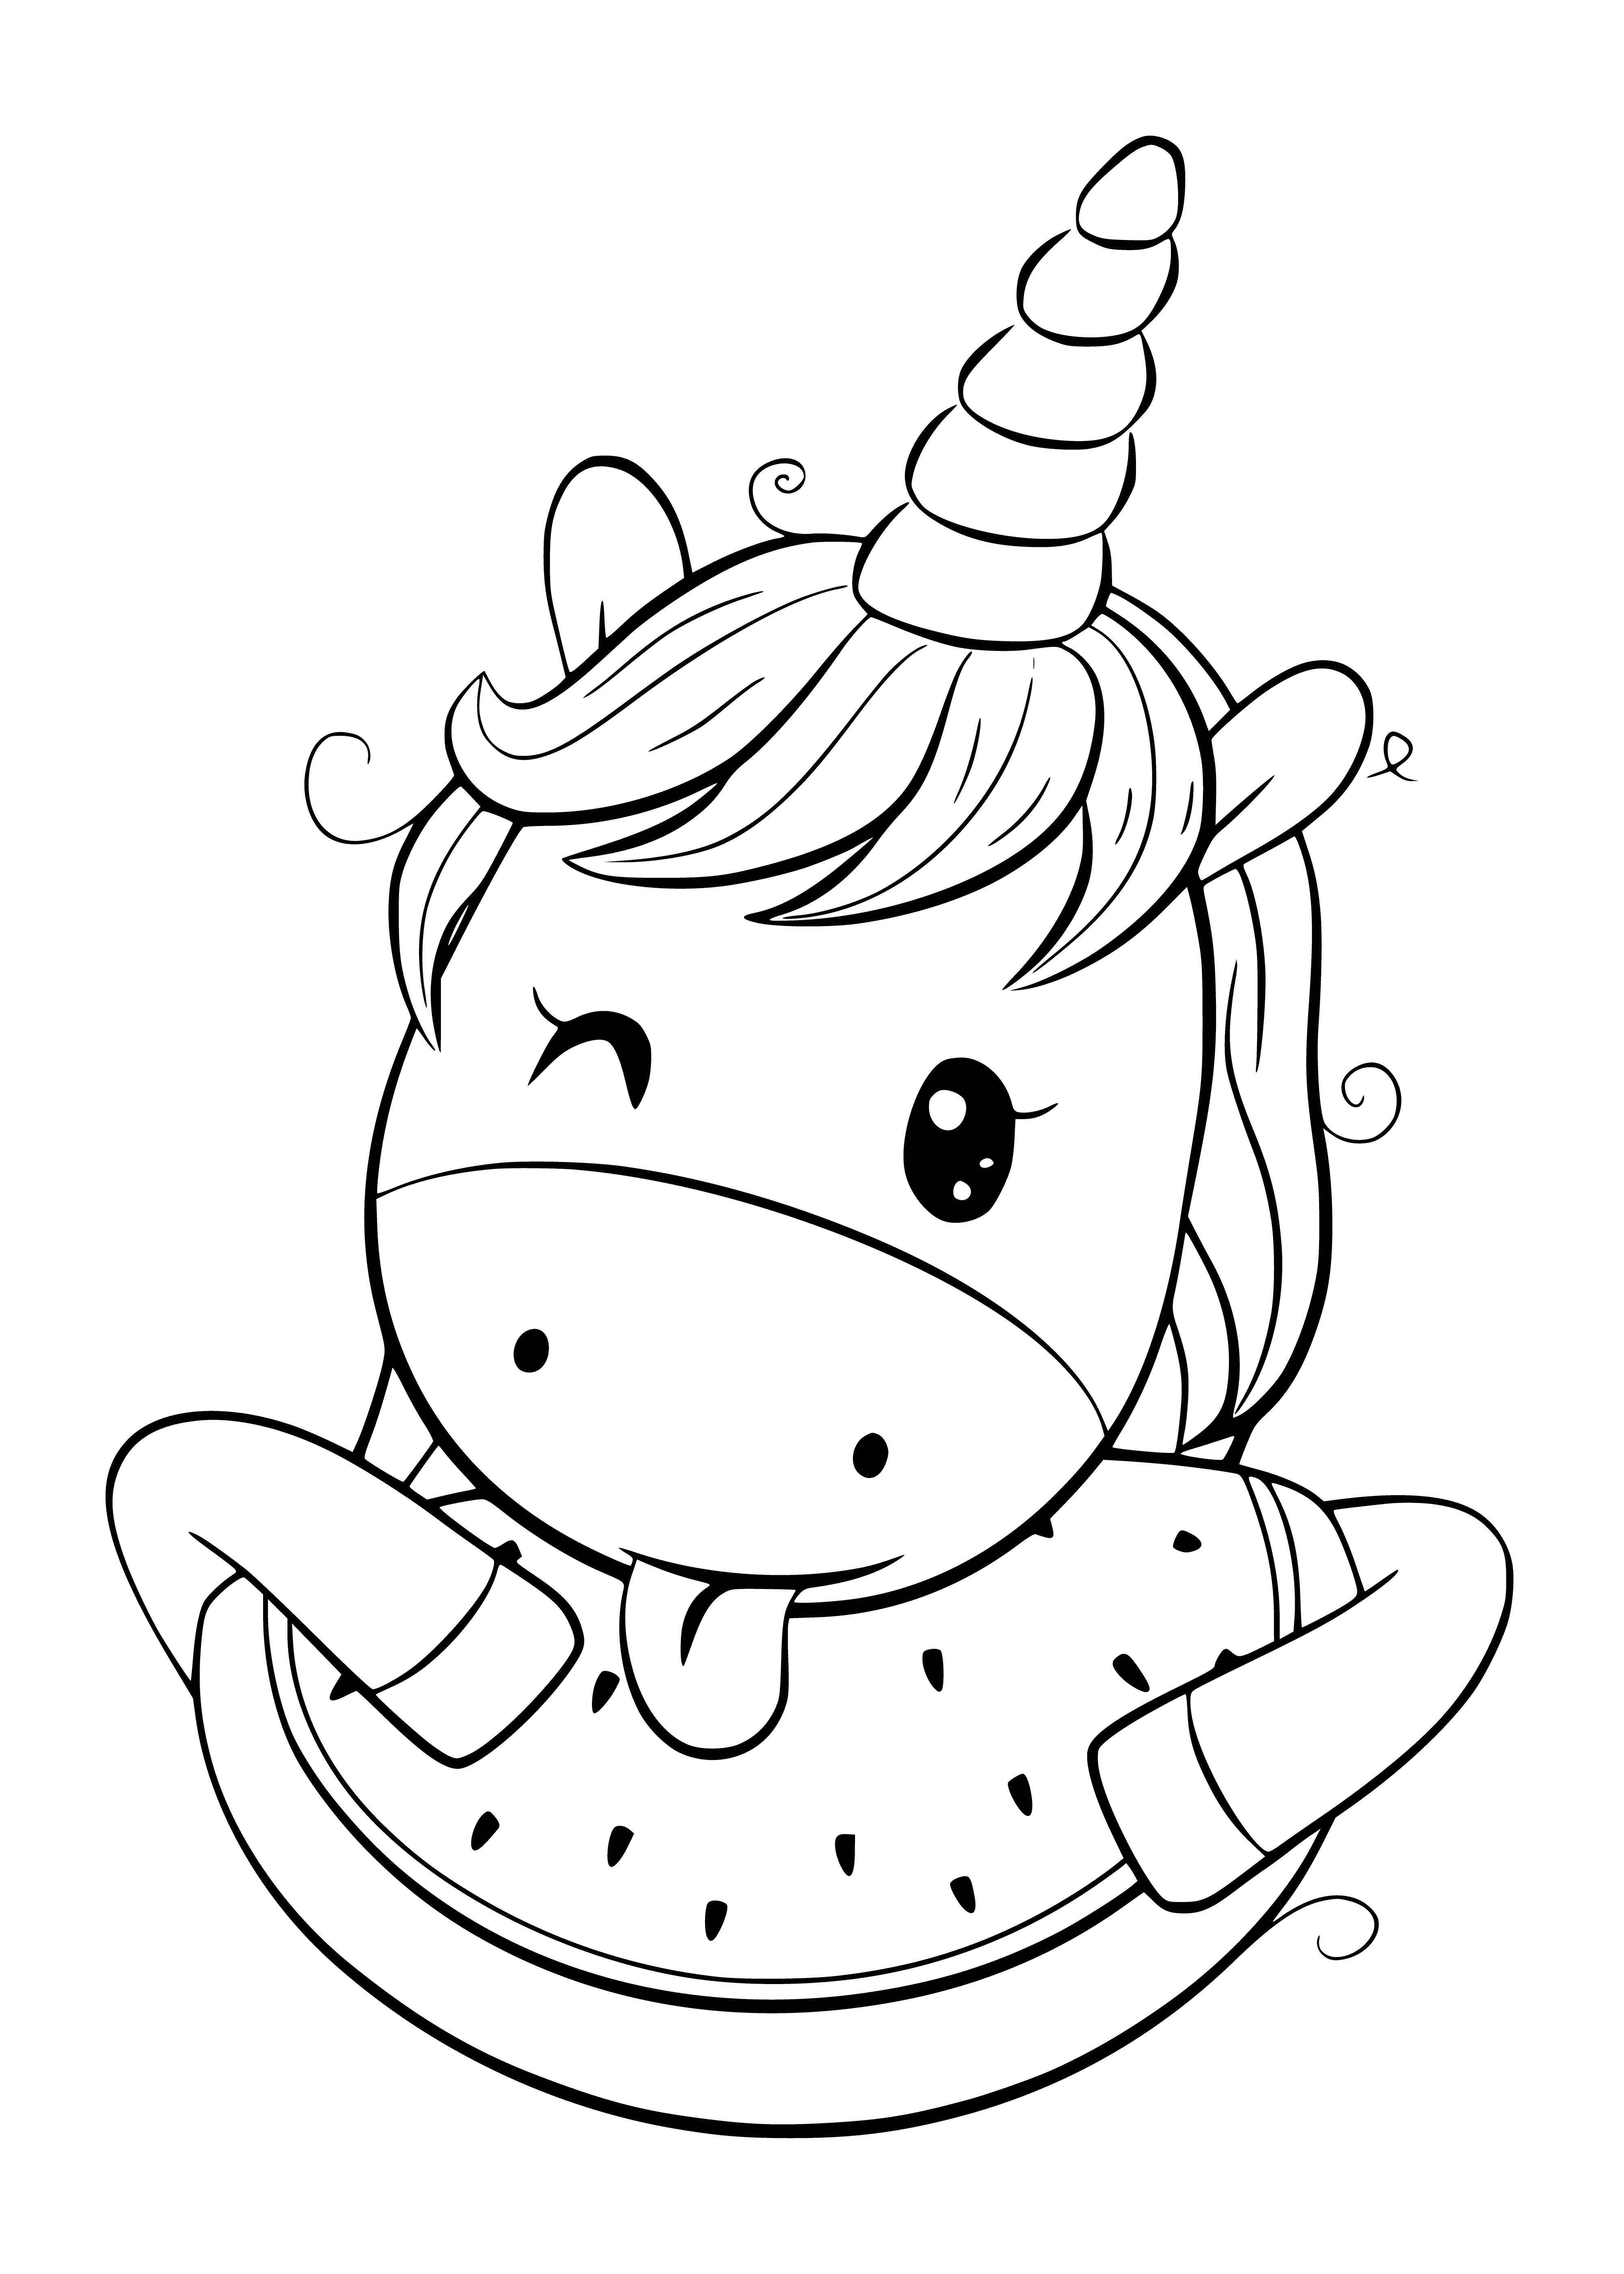 coloring page: Cute Unicorn surrounded by hearts & flowers! It has big, sparkly eyes & a sweet smile. Manes and tails are fluffy, and it has a watermelon slice! #Kawaii